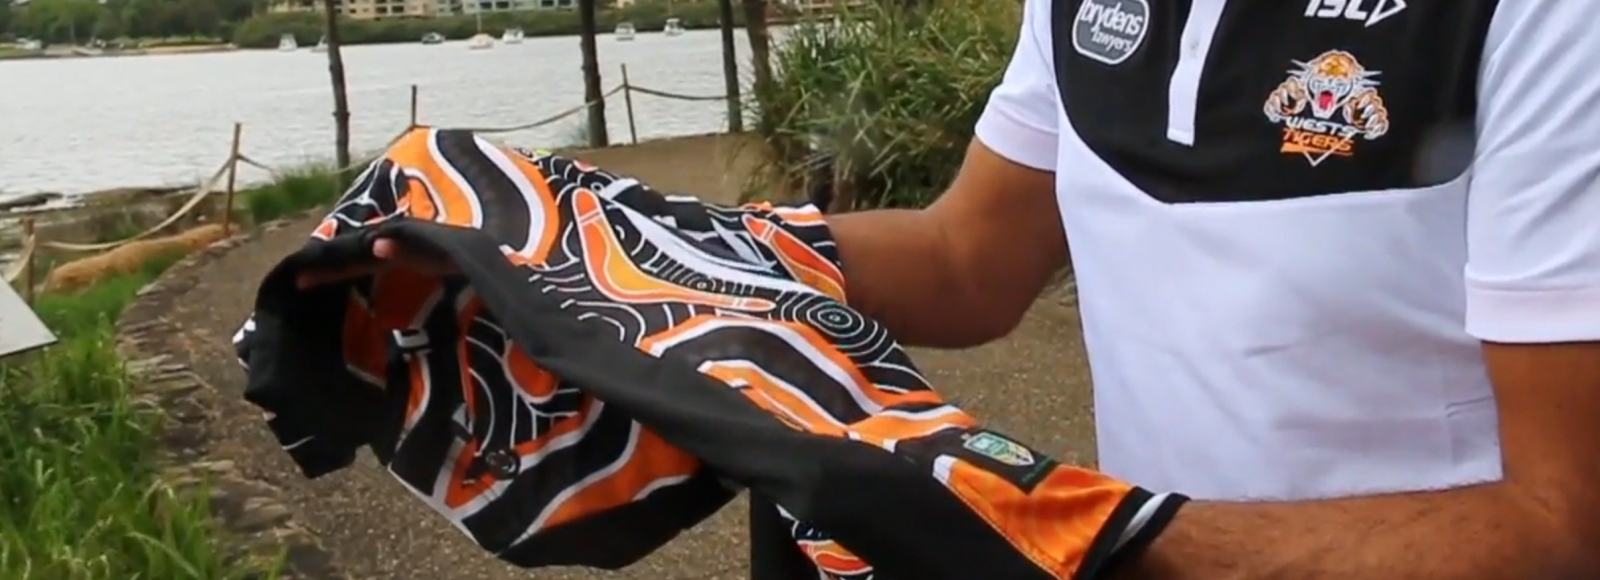 west tigers indigenous jersey